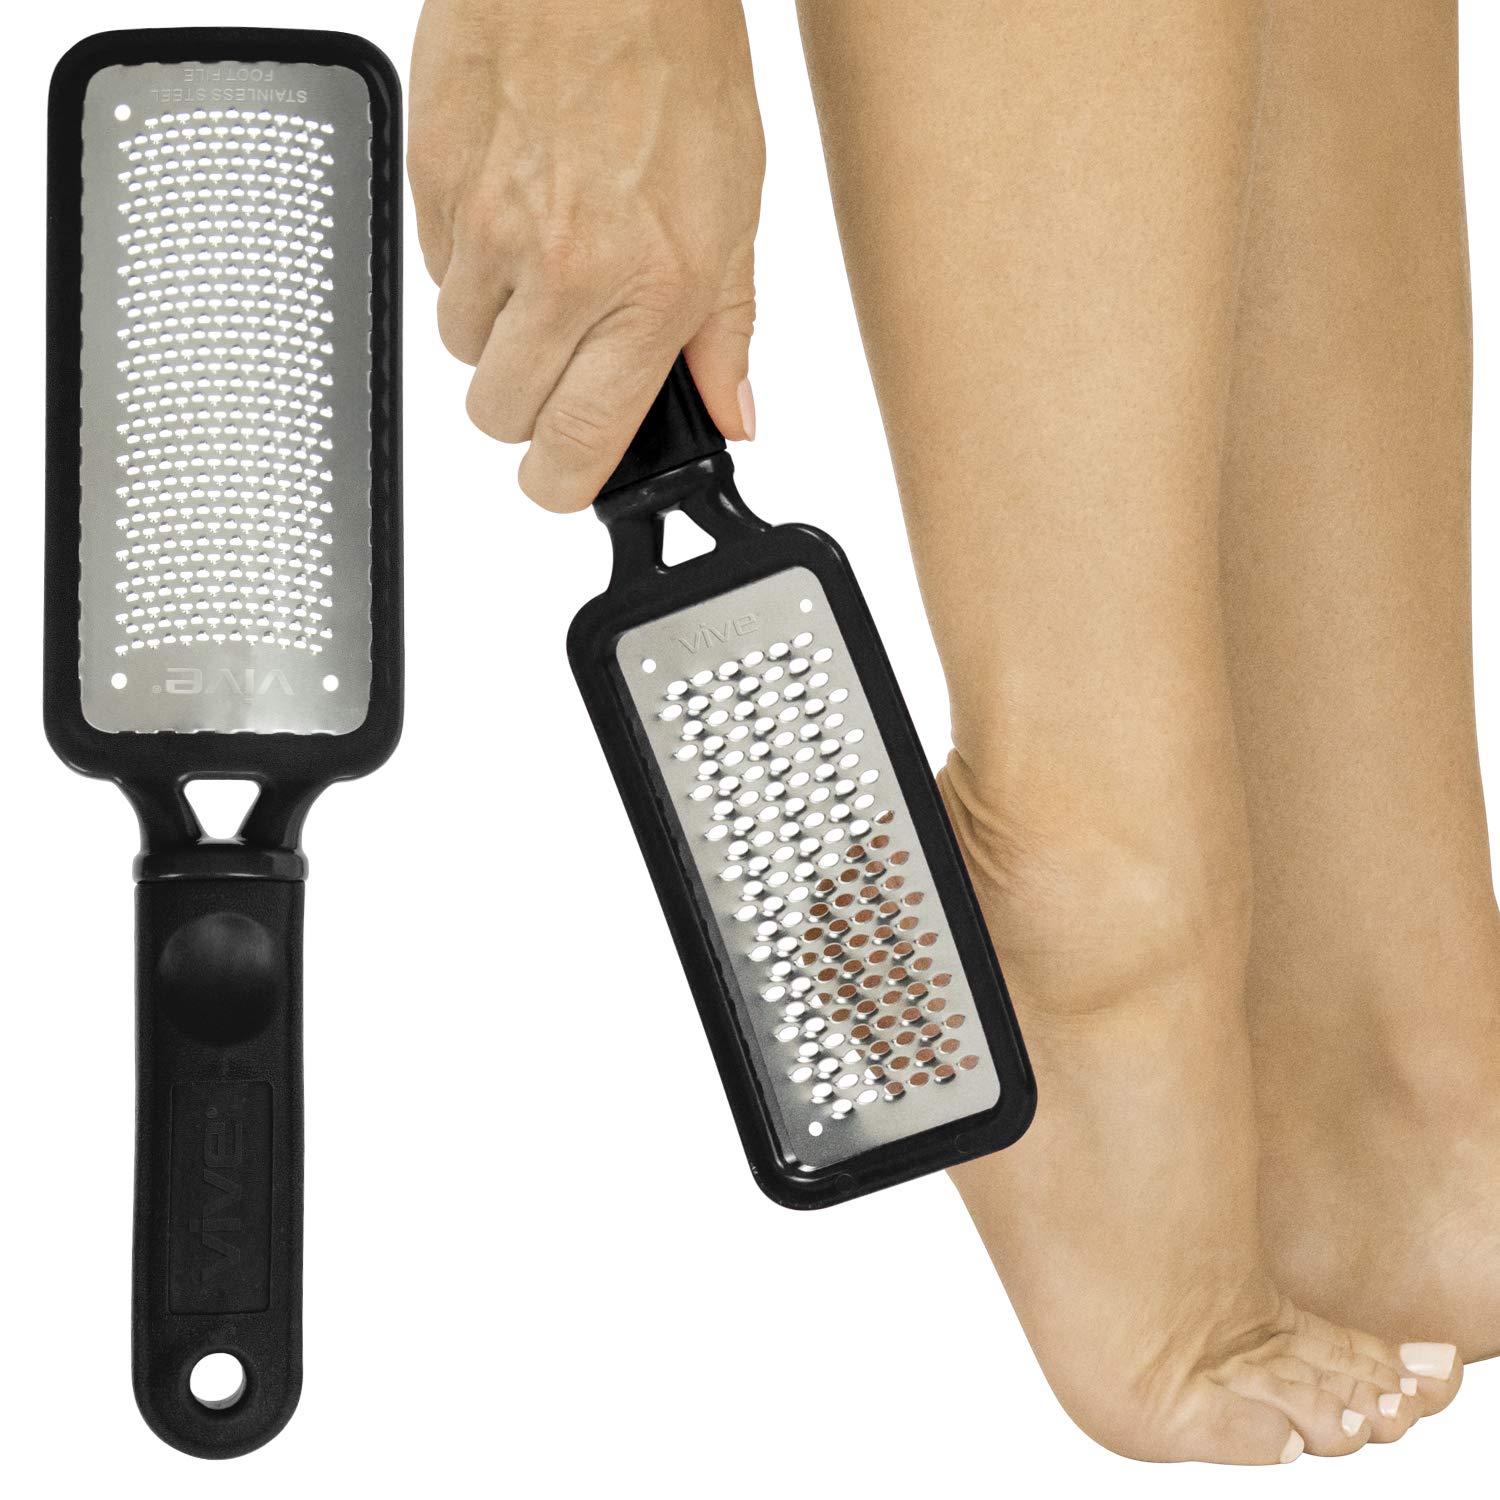 Ezgoodz Pedicure Foot File, White Foot Grater for Dead Skin, Dry and Cracked Heels, Colossal Foot Rasp Foot File and Callus Remover with Ergonomic